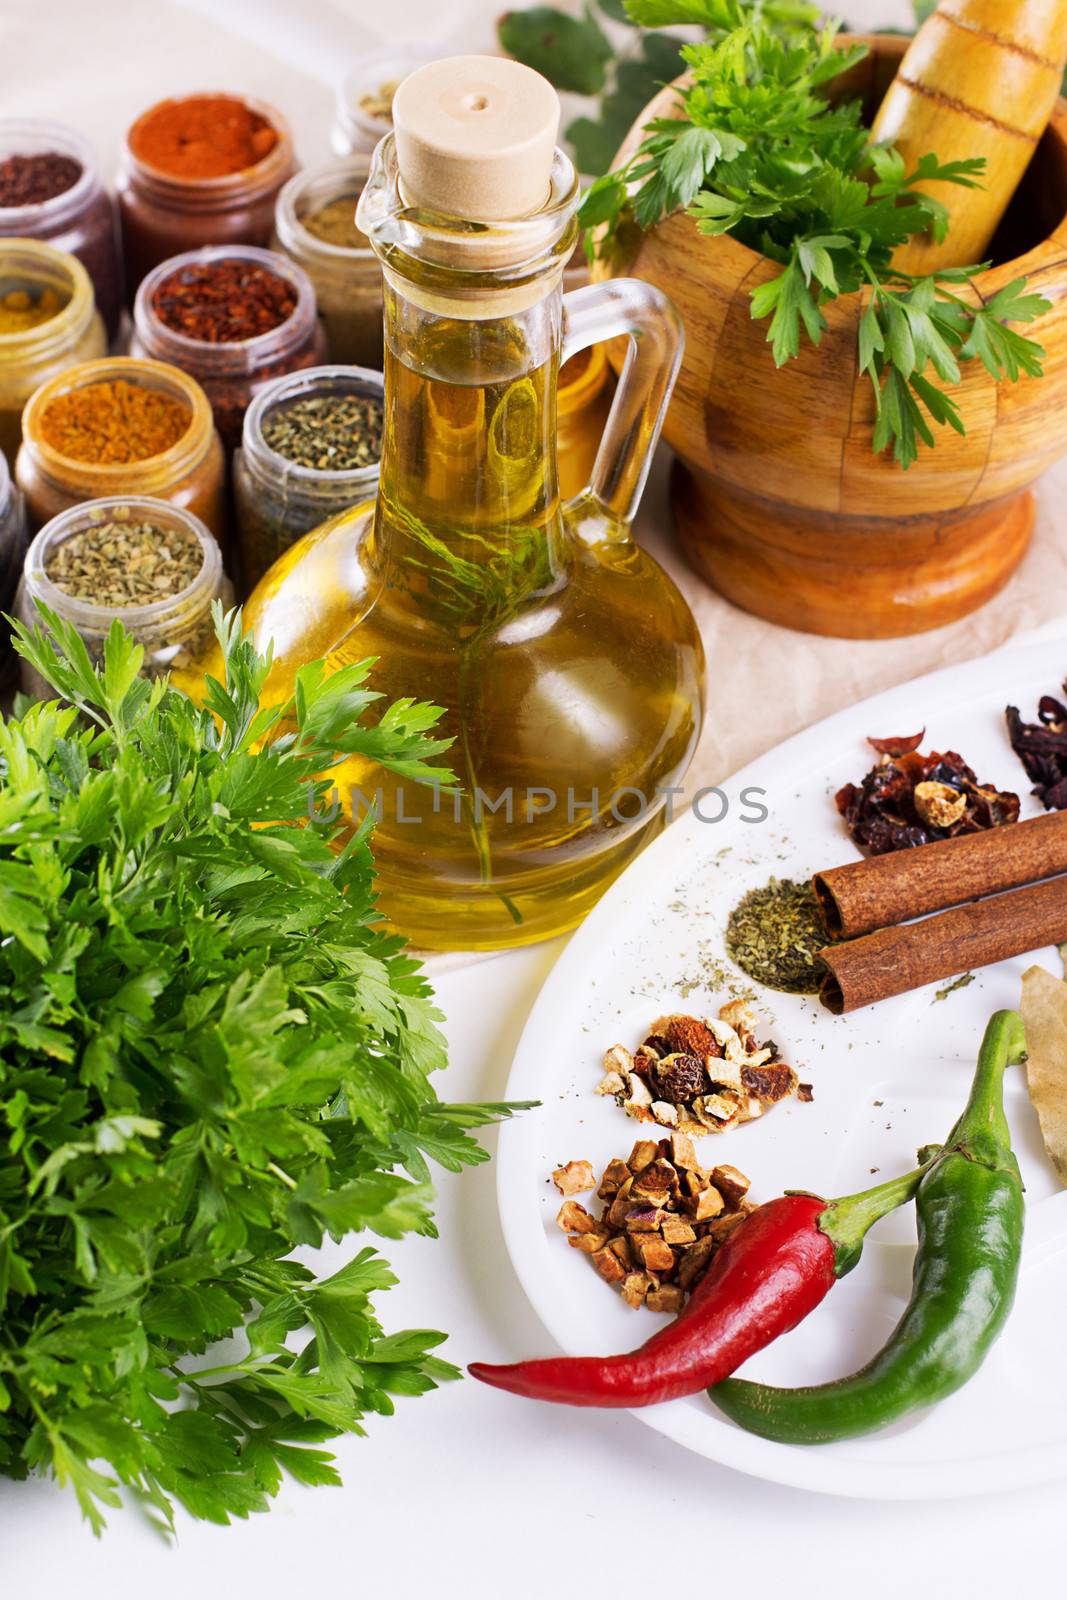 Mix of fresh herbs, spices and oil by Angel_a